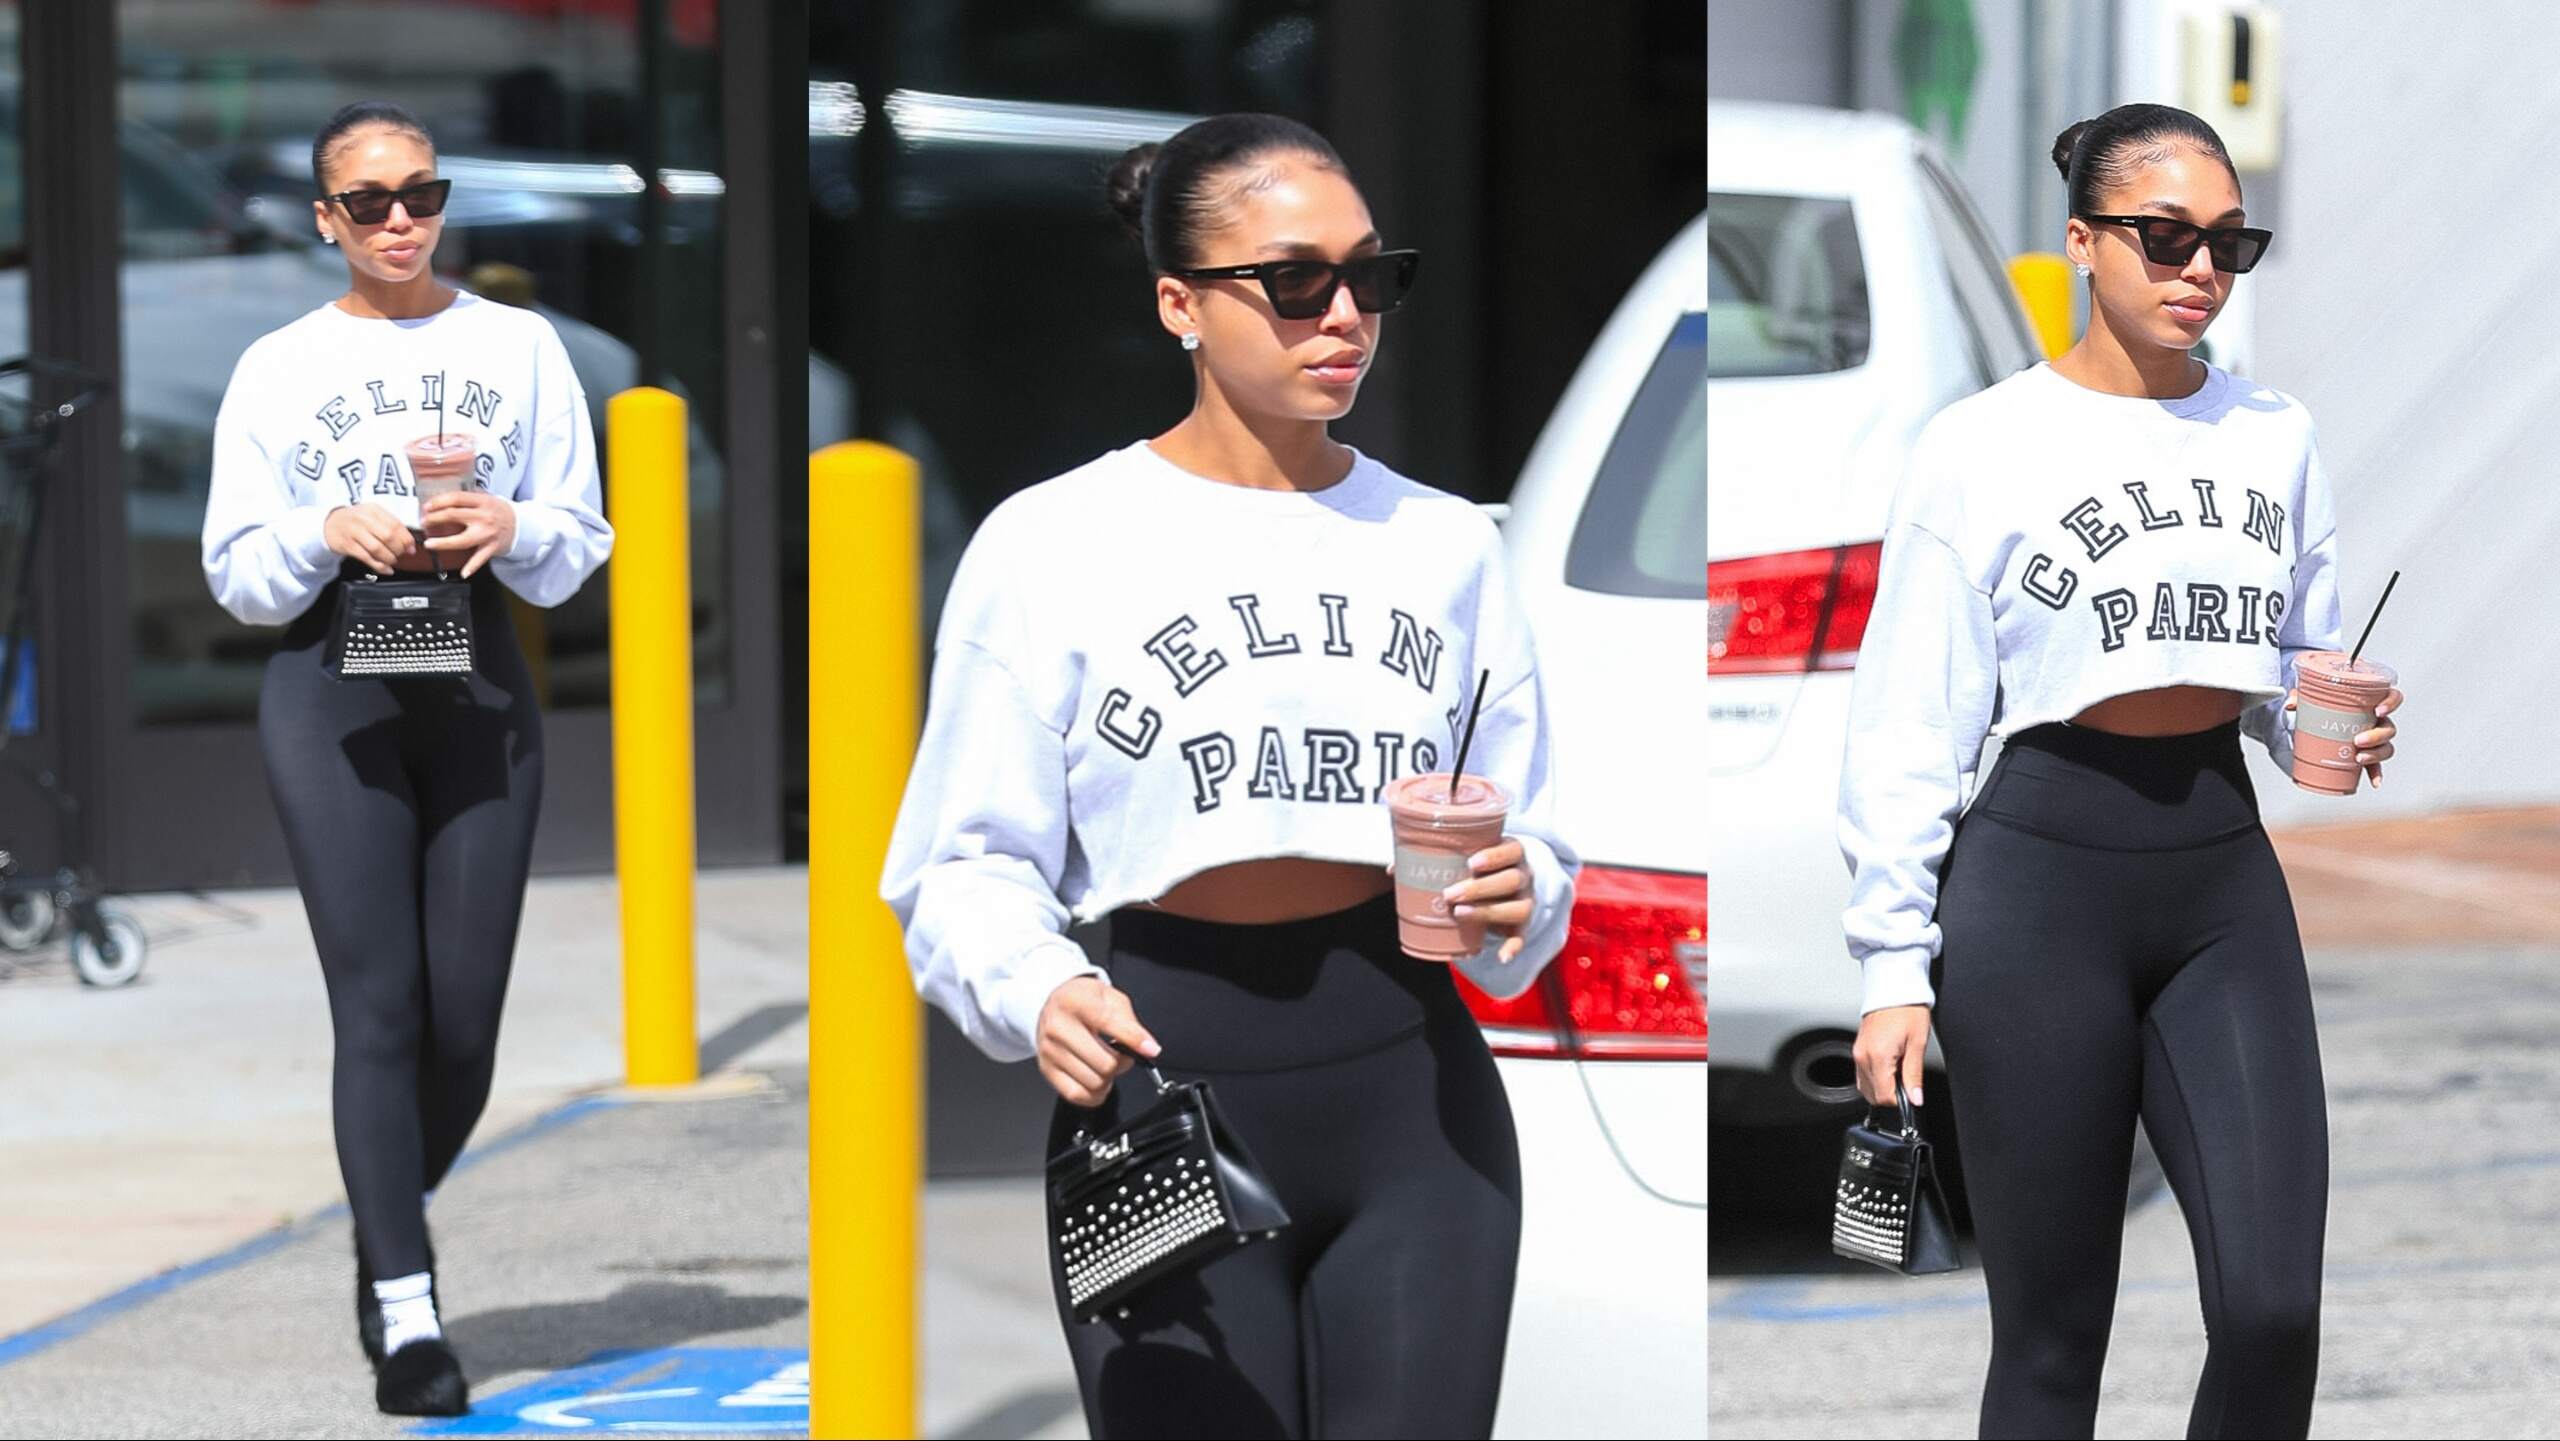 Model Lori Harvey carries a smoothie after working out in black leggings and a gray cut-off sweatshirt